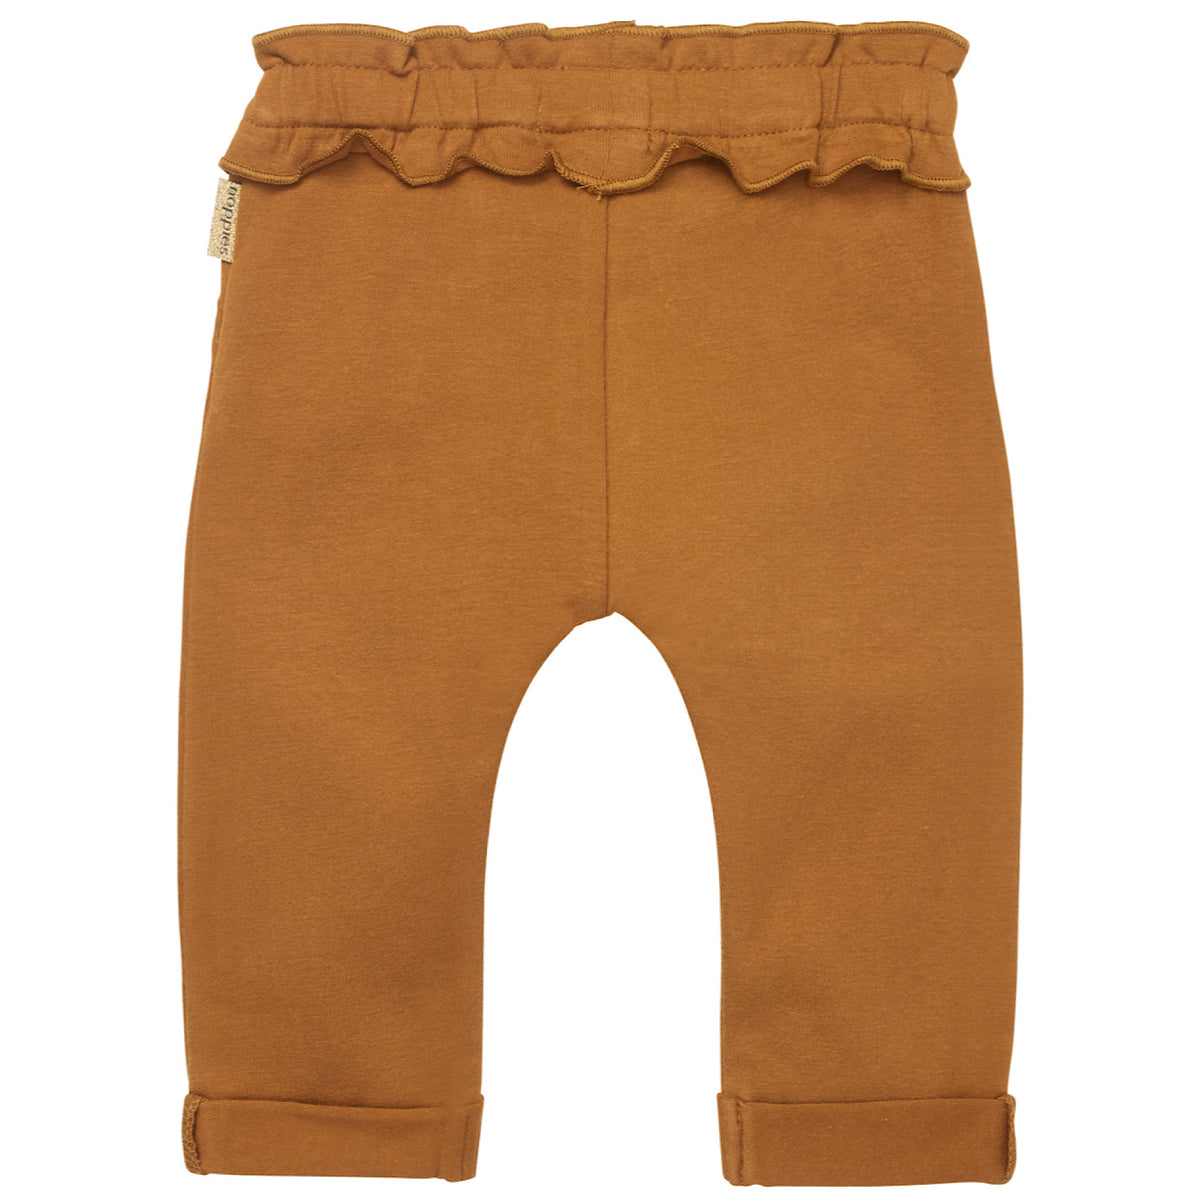 Cotton Trousers with Ruffle Detailing, Spice